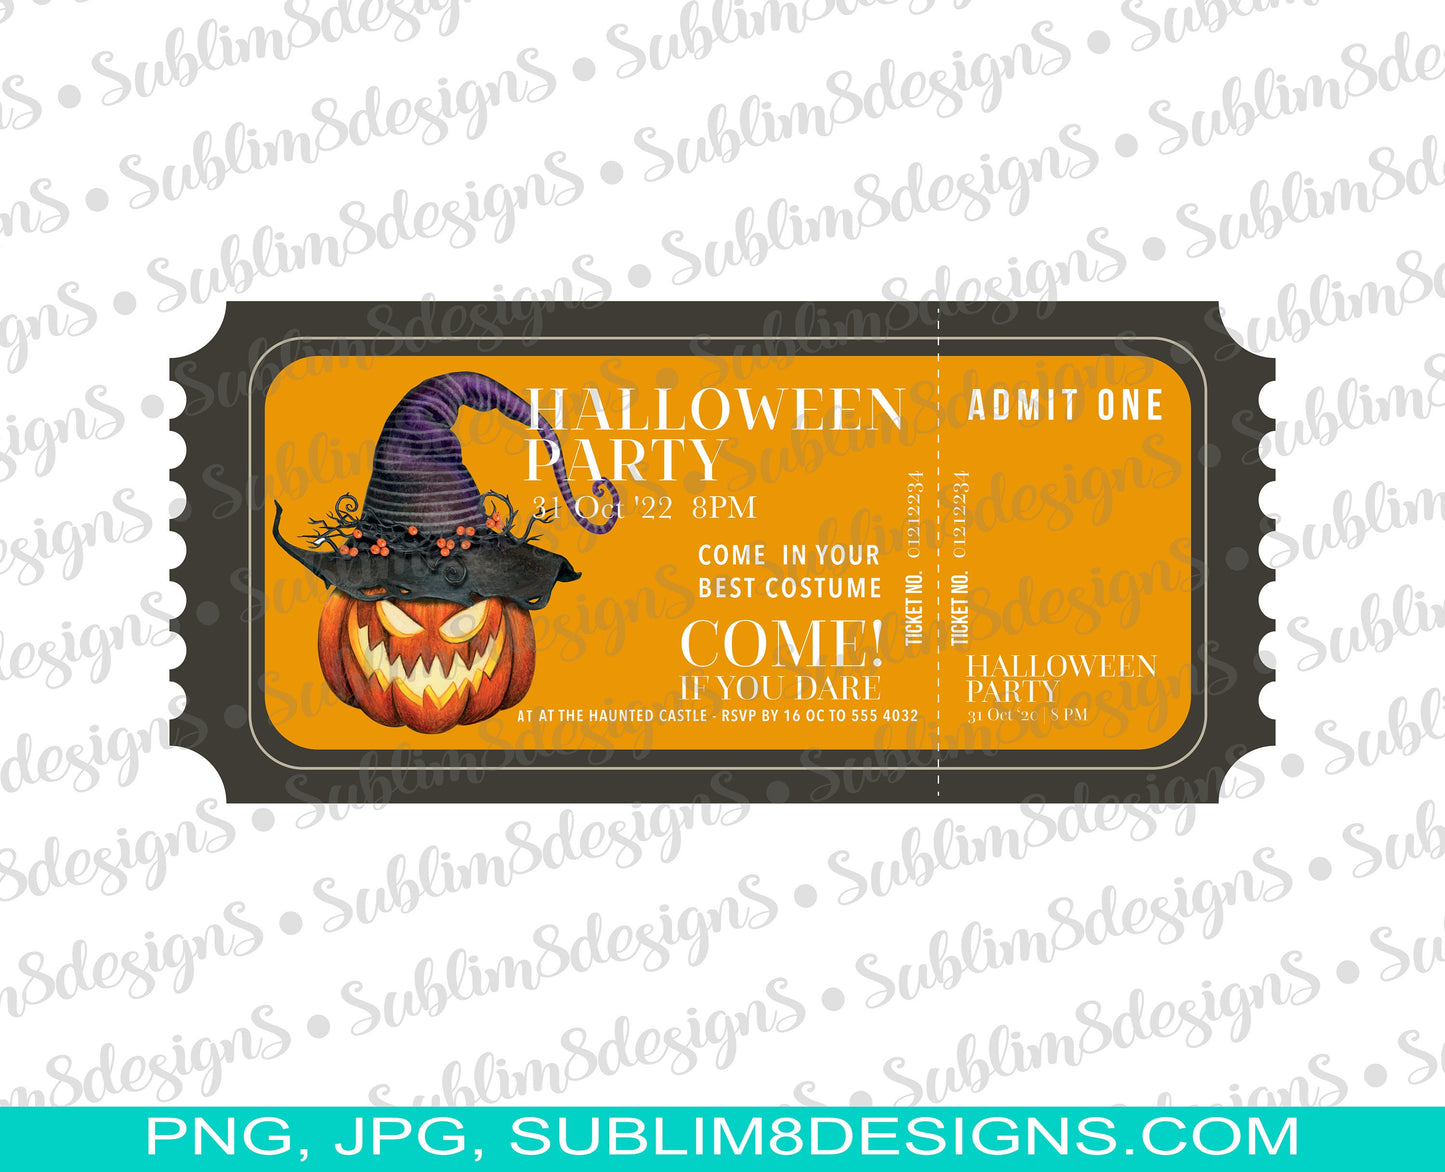 Personalized Halloween Party Invite